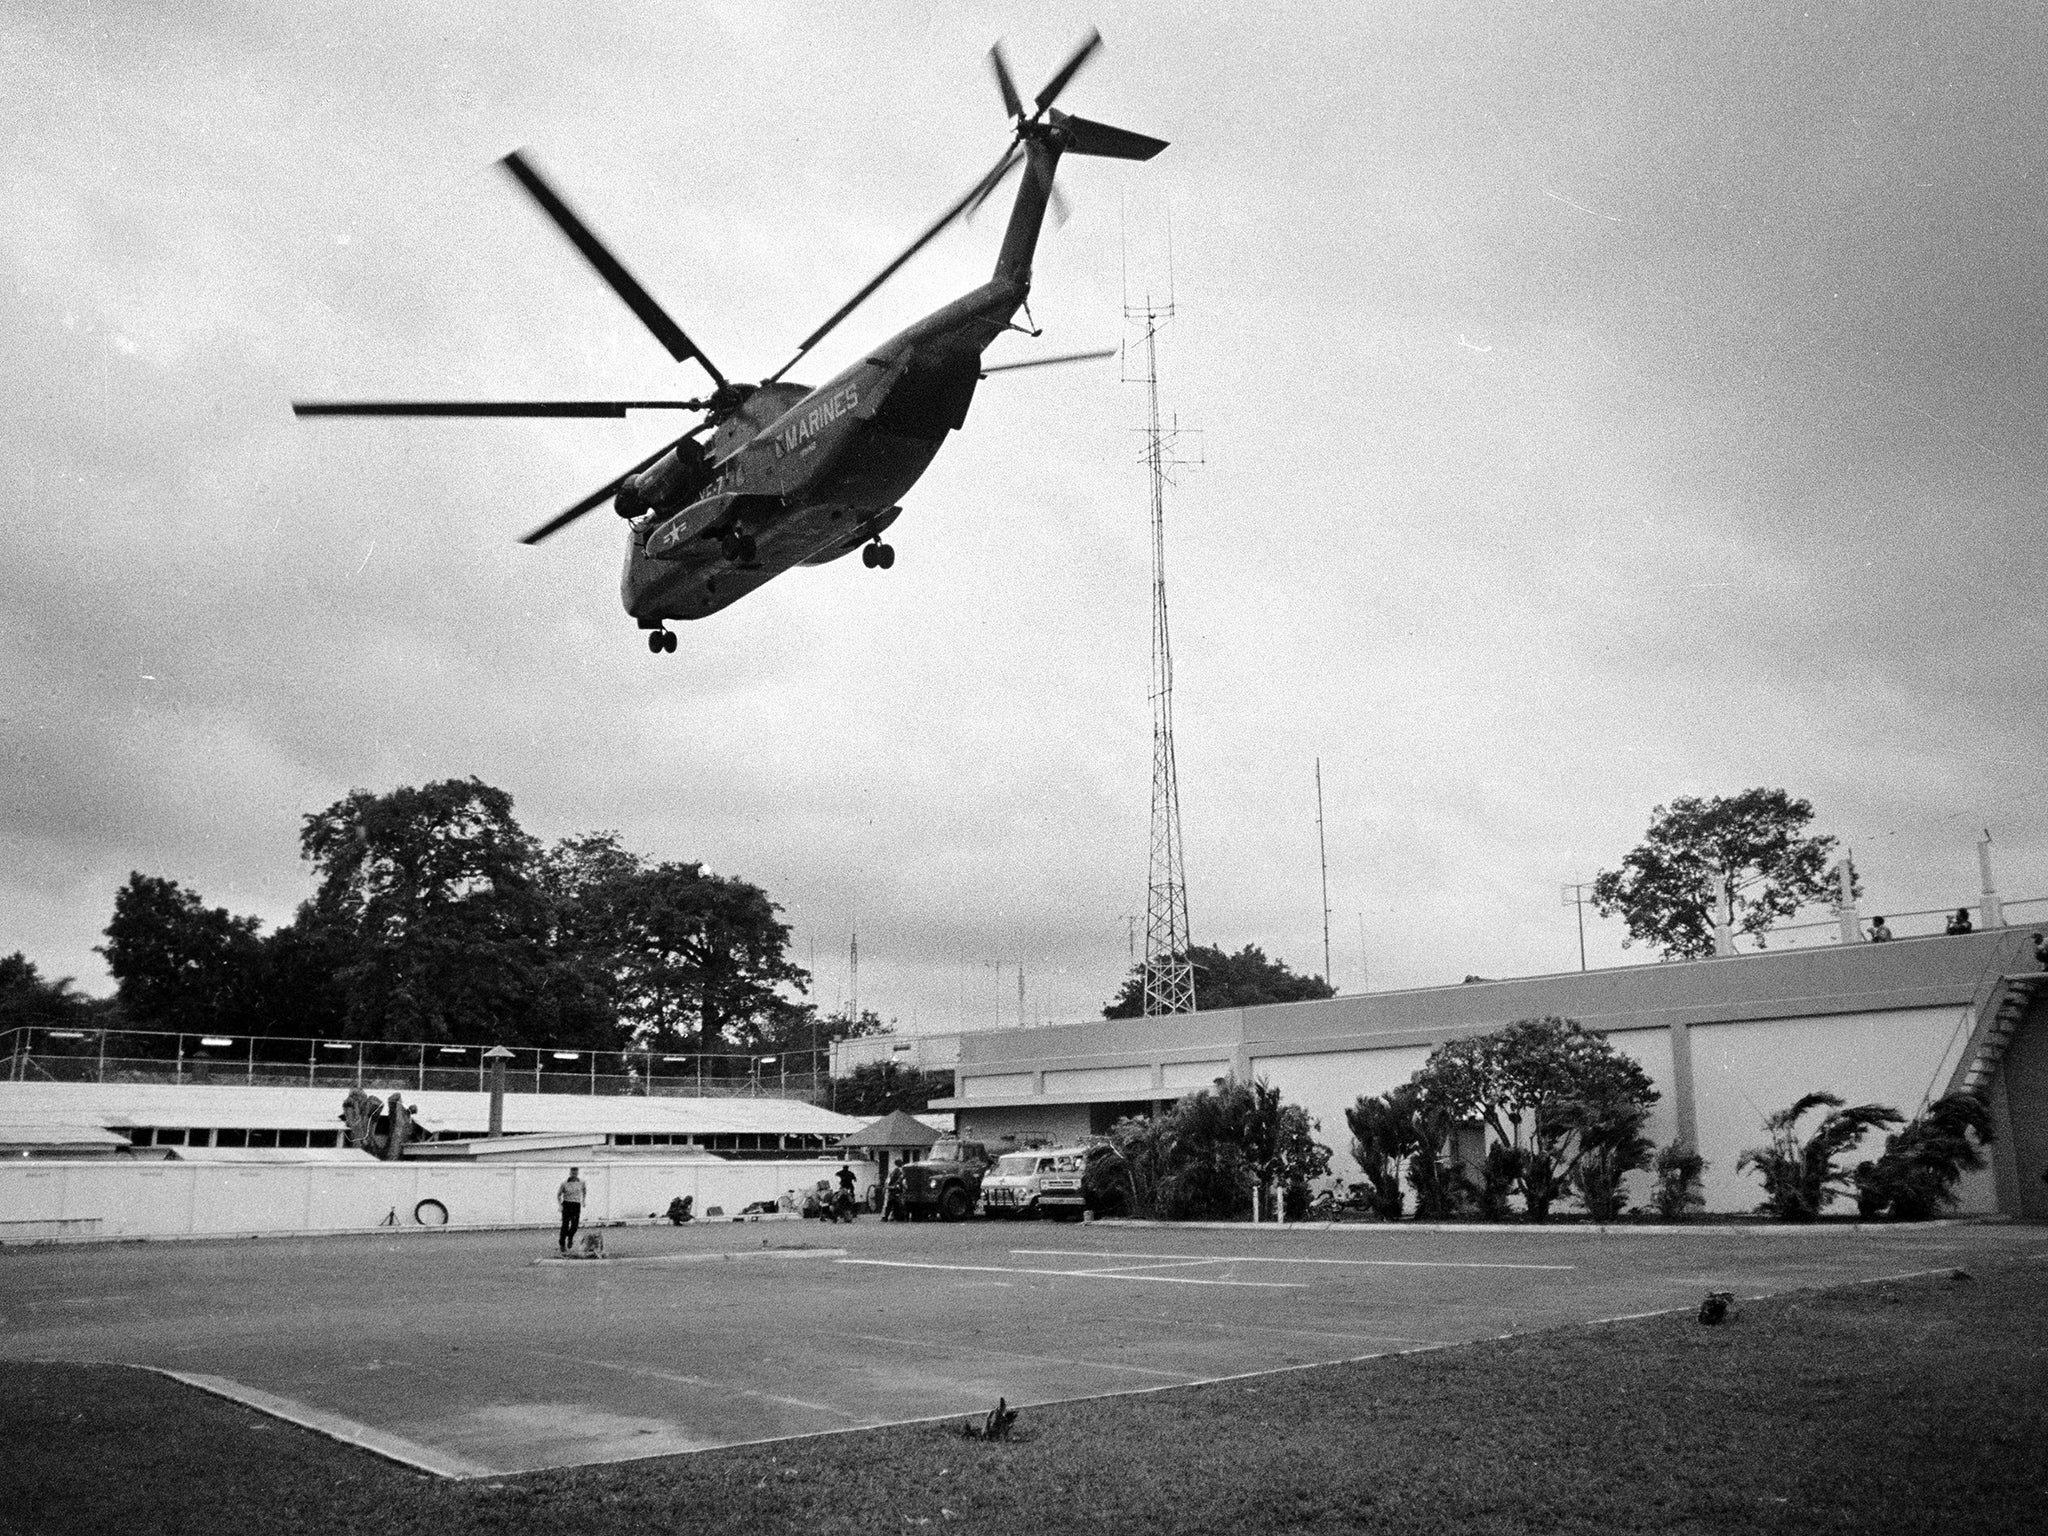 A helicopter lifts off from the US embassy in Saigon, Vietnam during last minute evacuation of authorized personnel and civilians on 29 April 1975